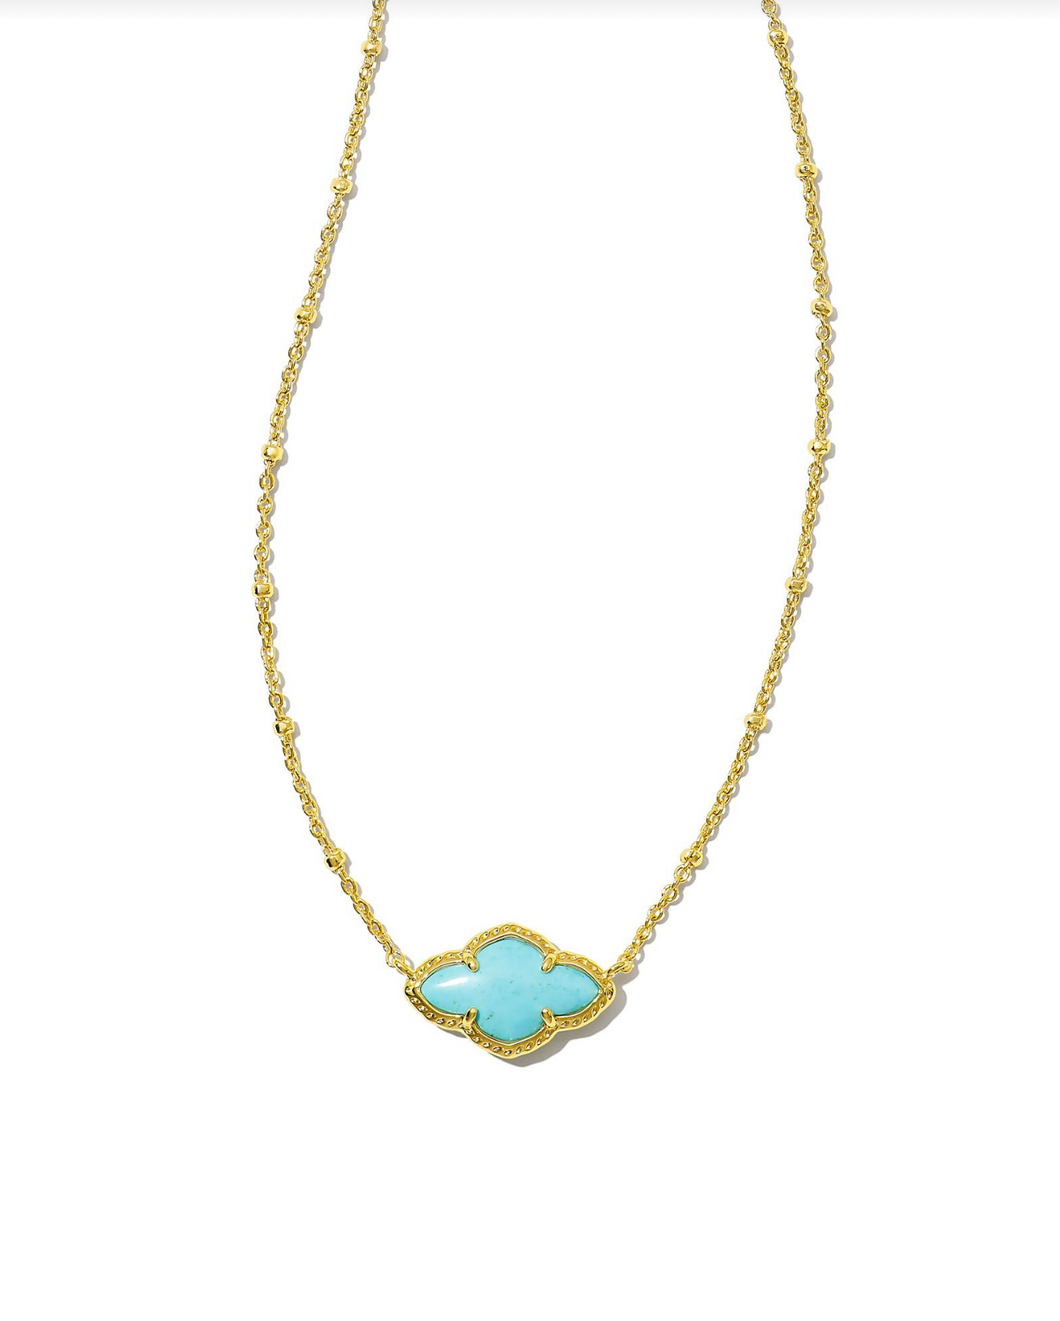 Abbie Gold Pendant Necklace in Variegated Turquoise by Kendra Scott